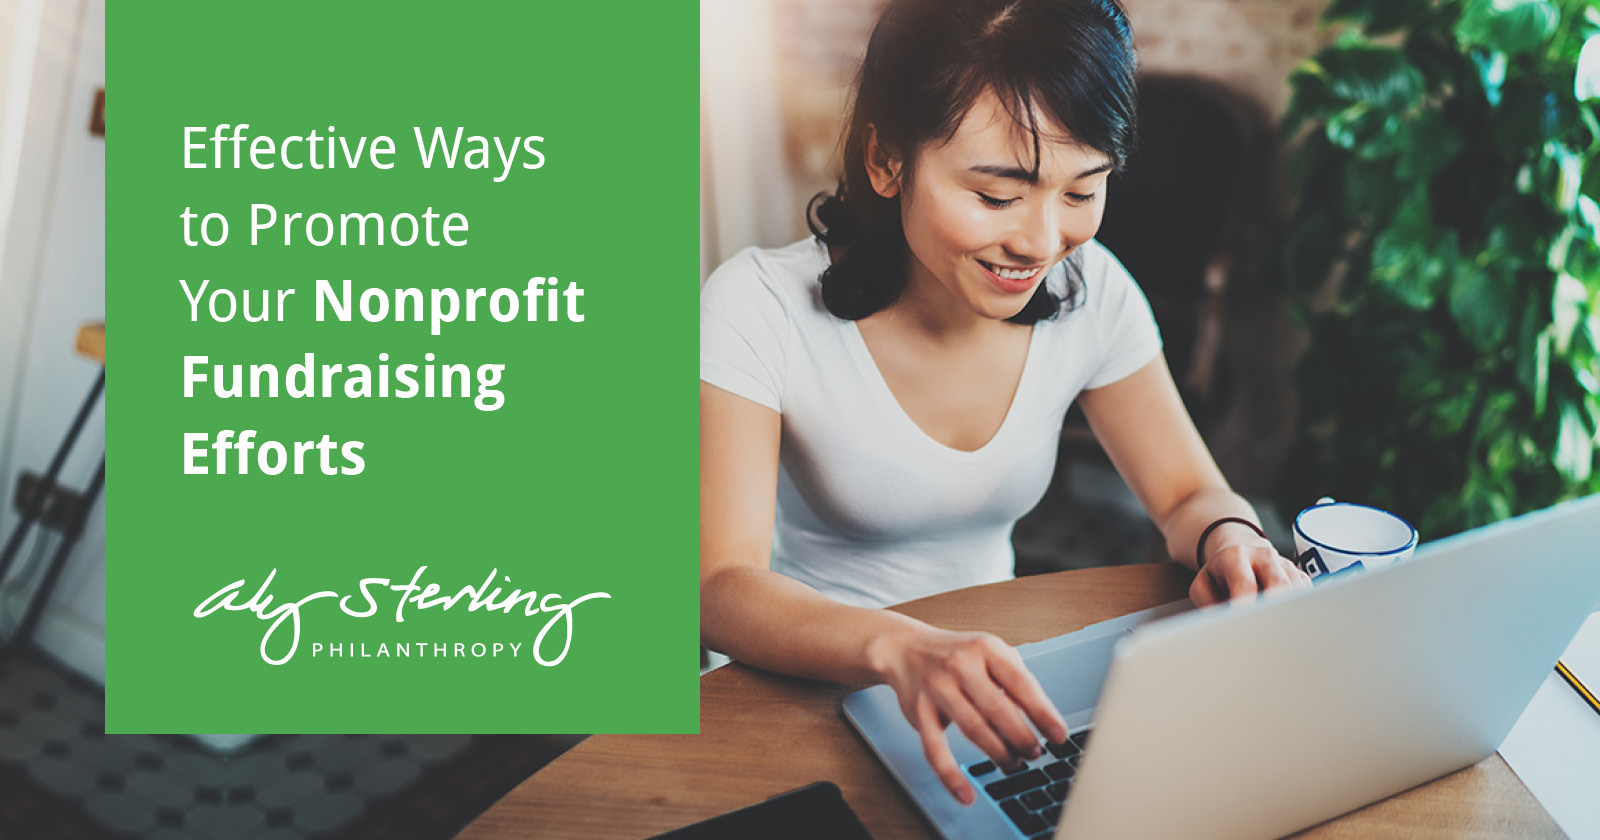 8 Effective Ways to Promote Your Nonprofit Fundraising Efforts